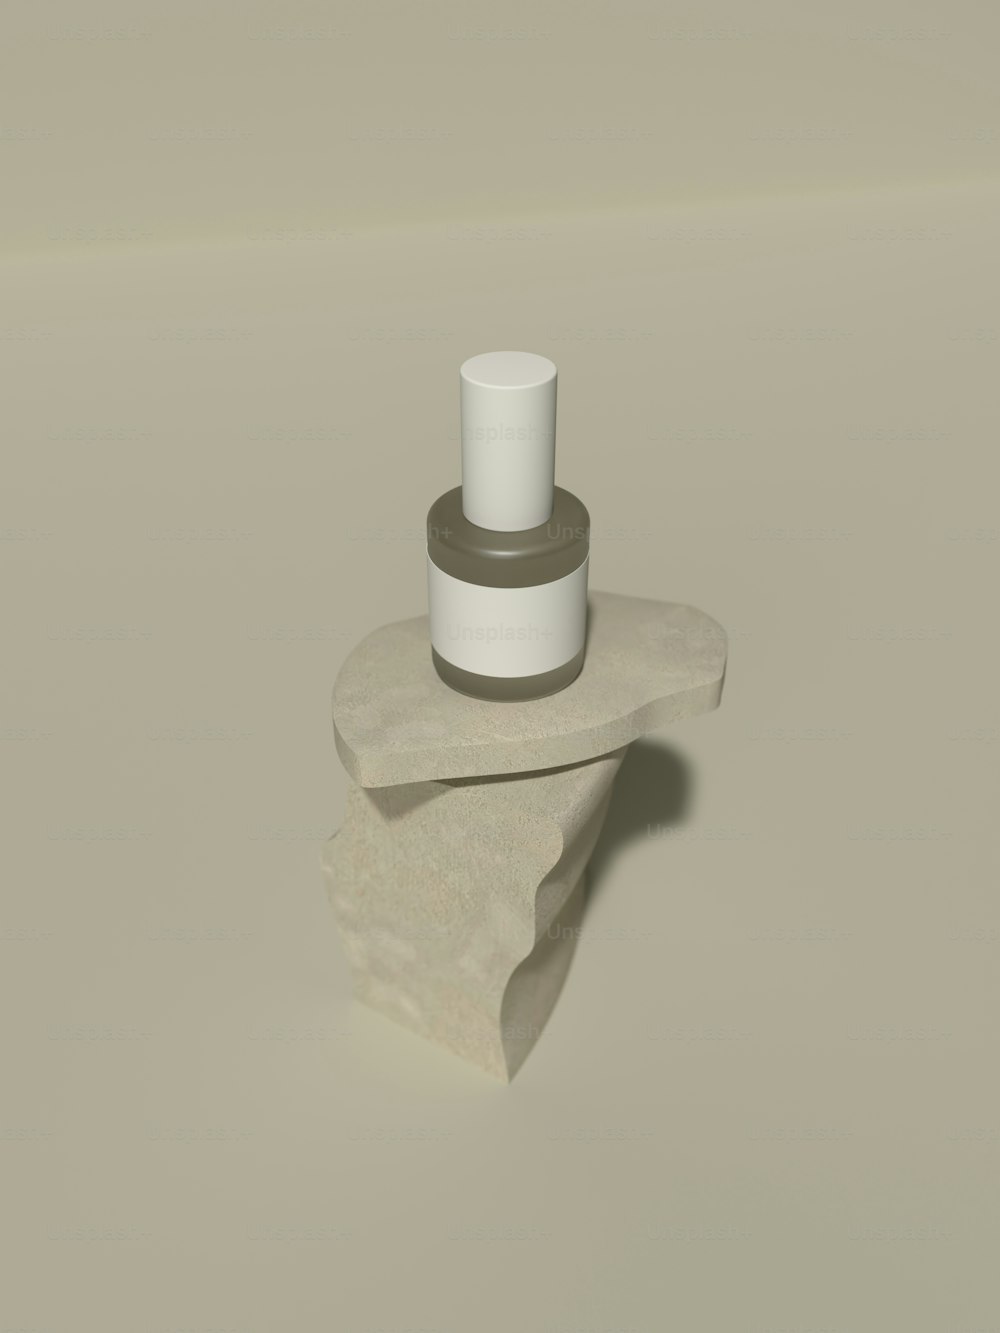 a white cylindrical object with a white object on a white surface